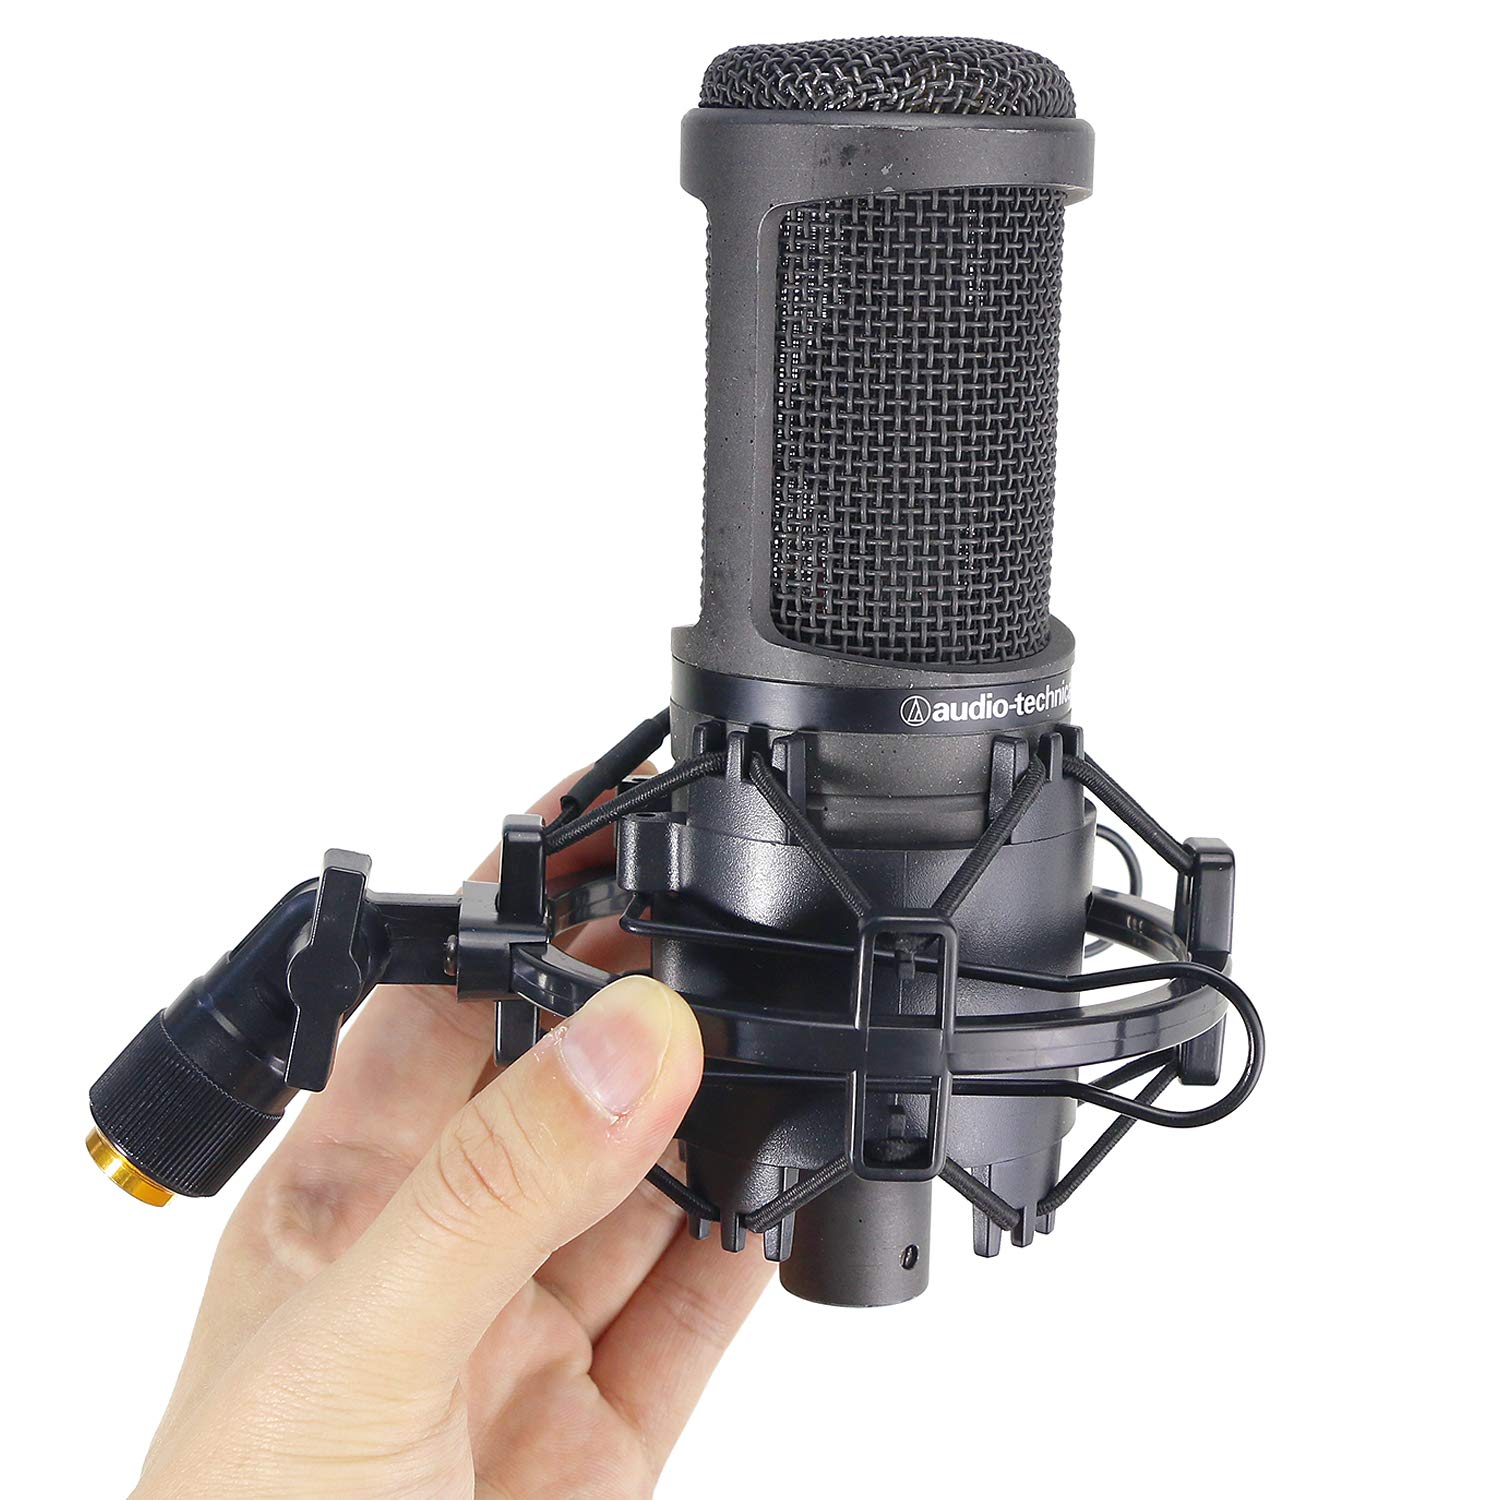 SUNMON AT2020 Shock Mount, Shock Mount Stand Reduces Vibration Noise for Audio Technica AT2020 AT2035 AT4040 AT2020USB ATR2500x Condenser Micphone